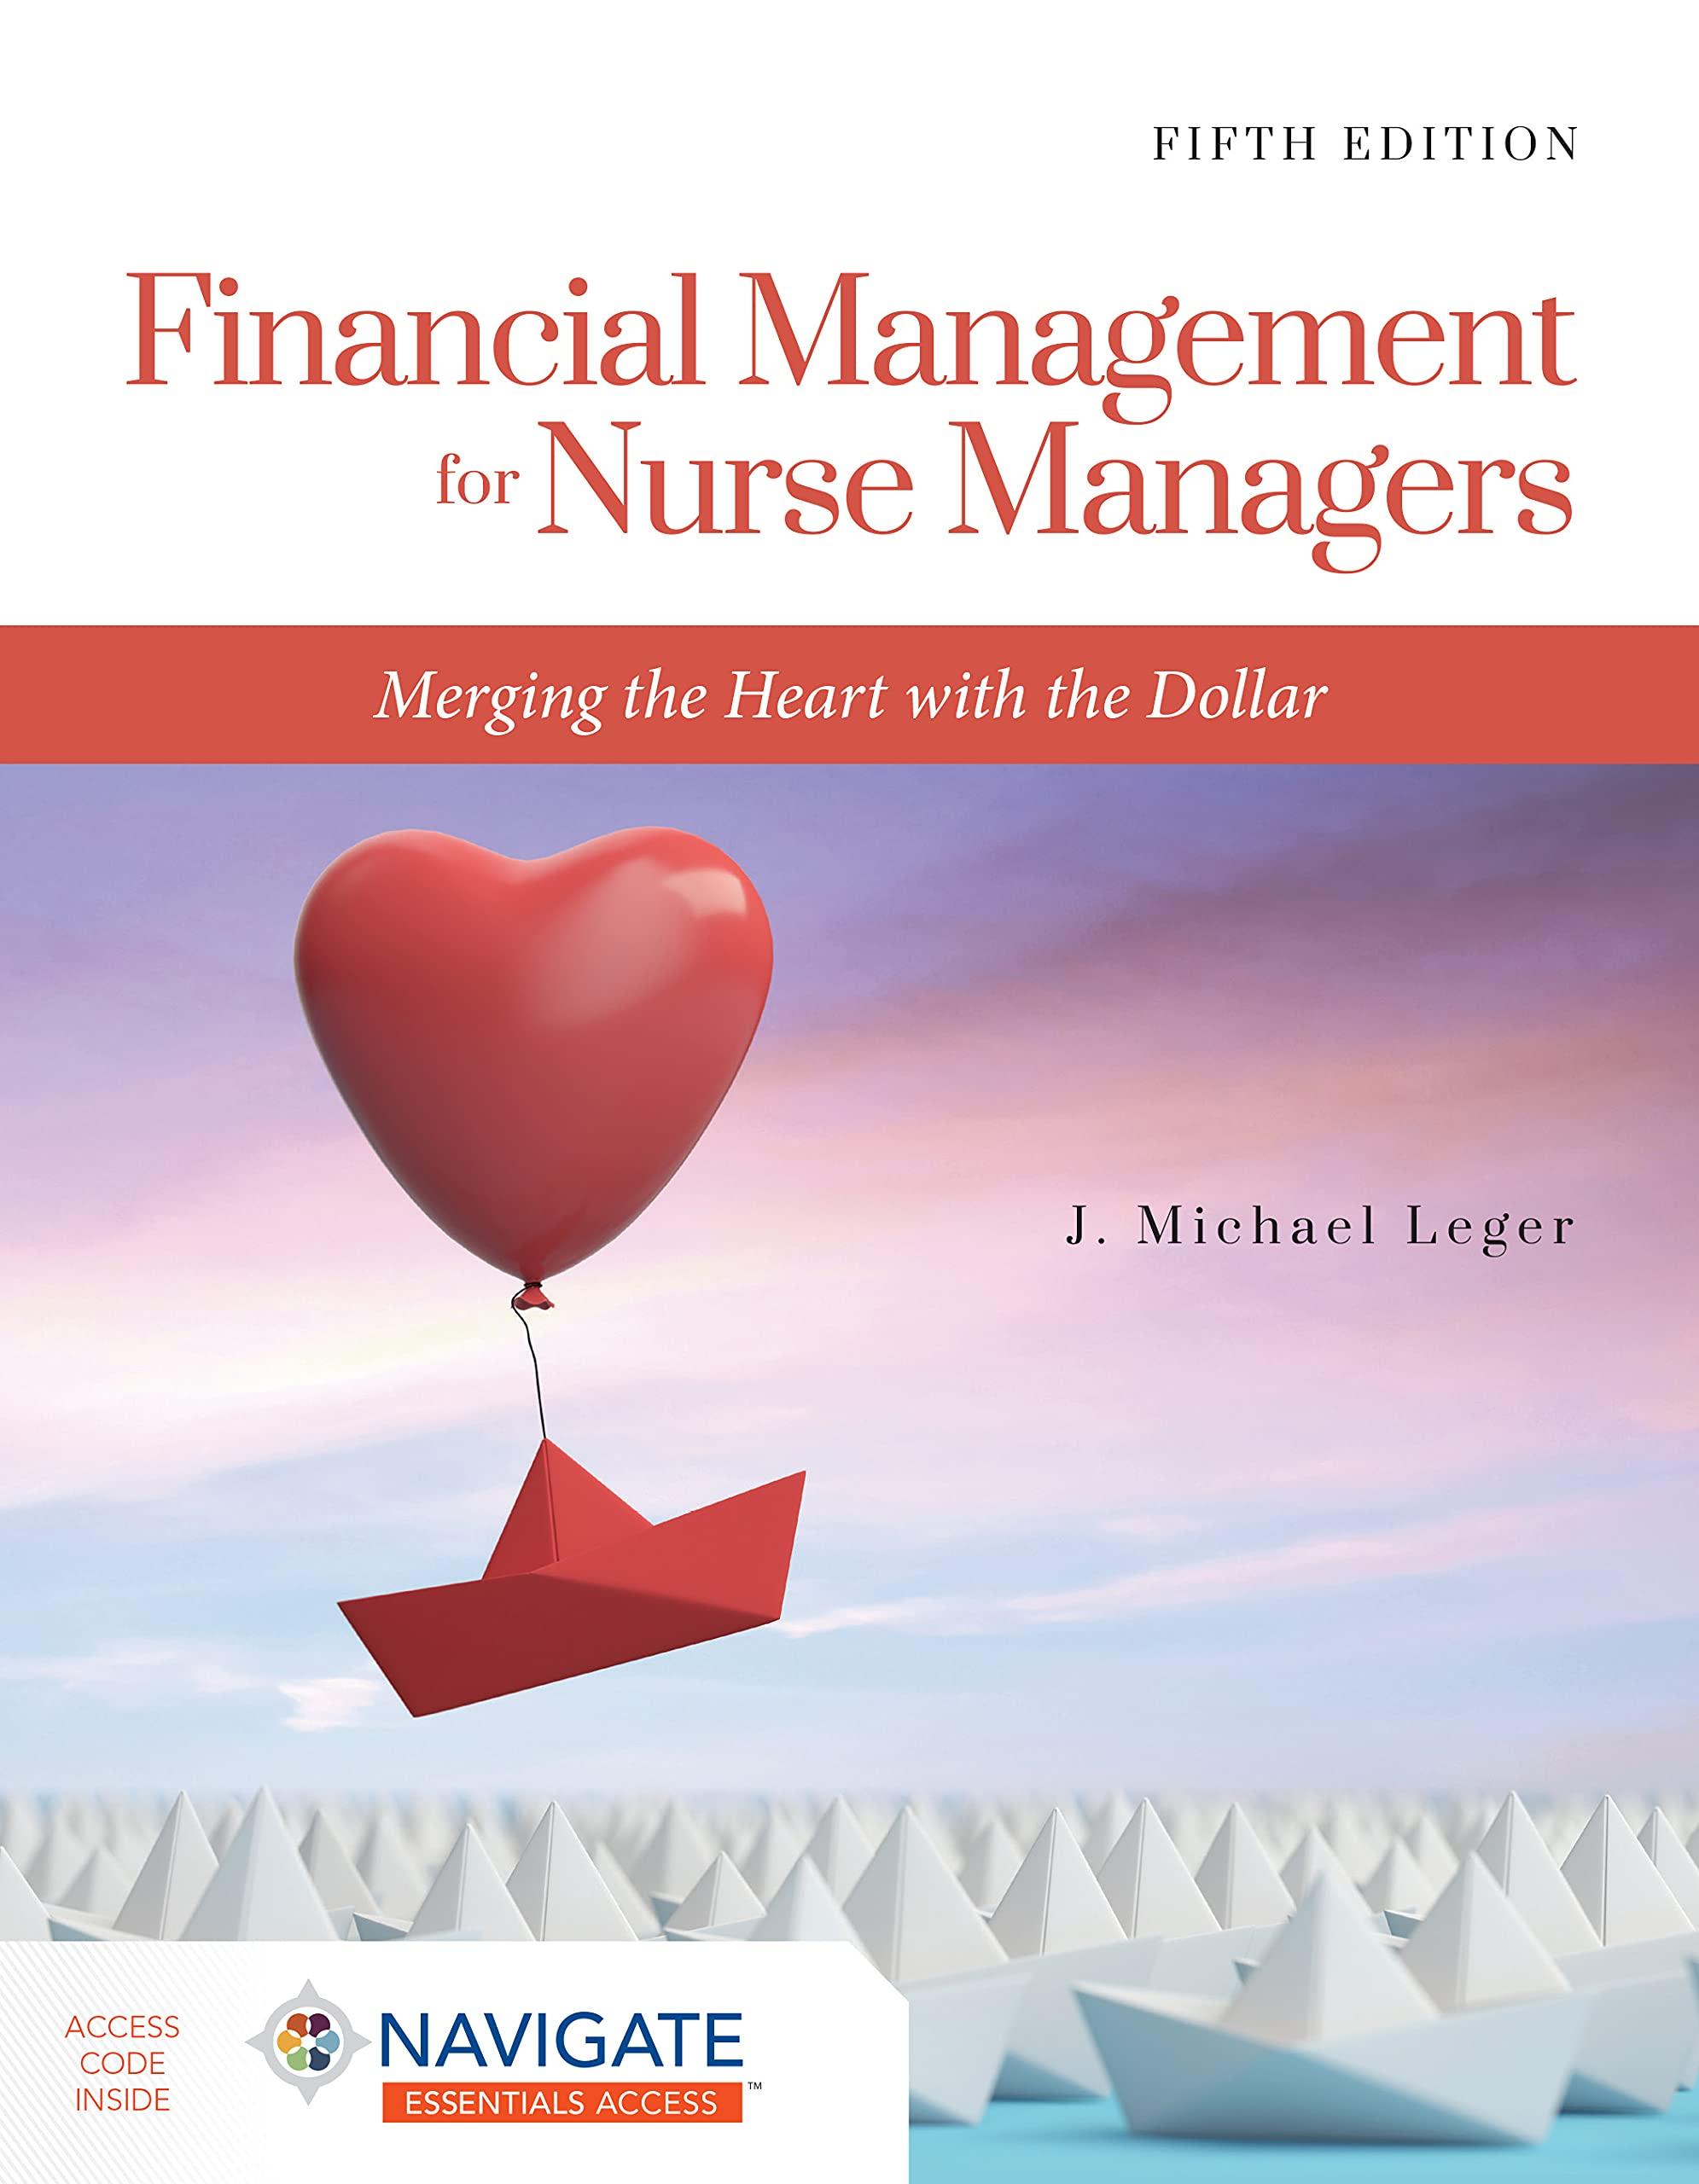 financial management for nurse managers merging the heart with the dollar 5th edition j. michael leger